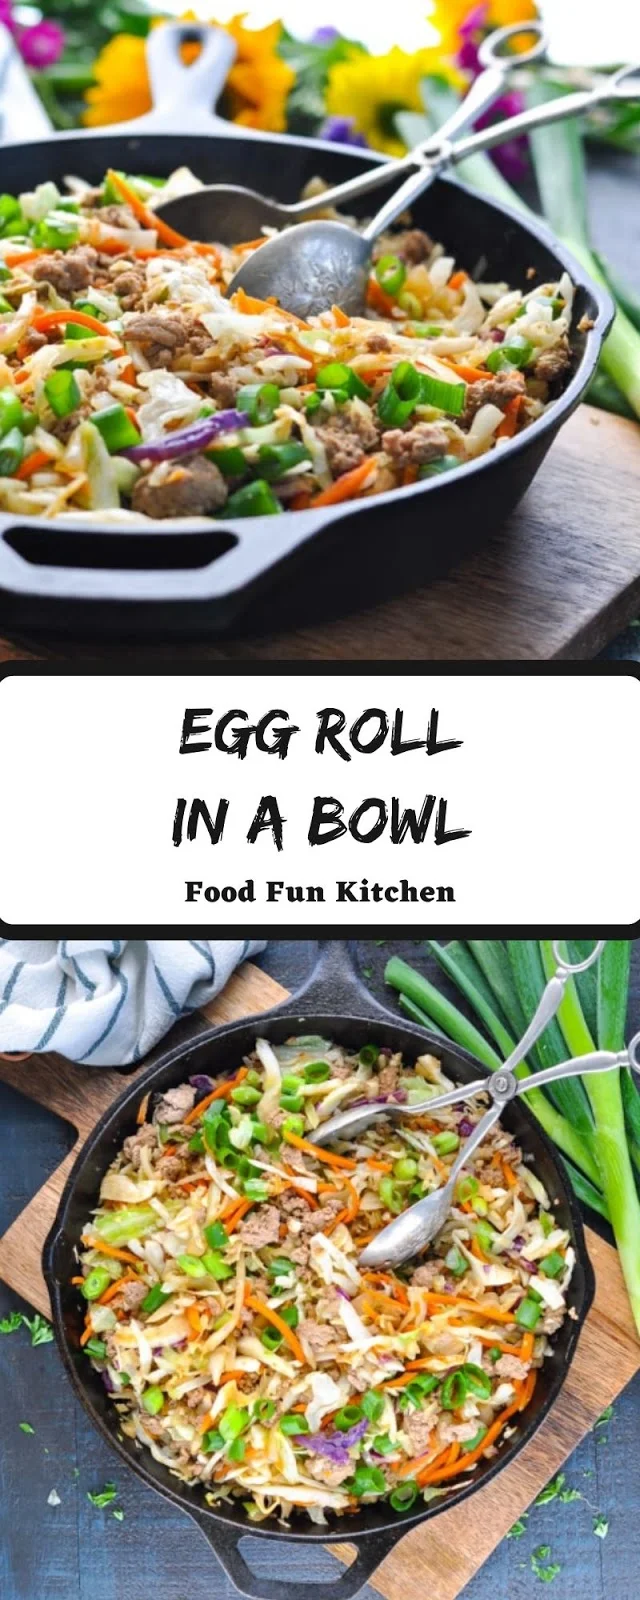 EGG ROLL IN A BOWL